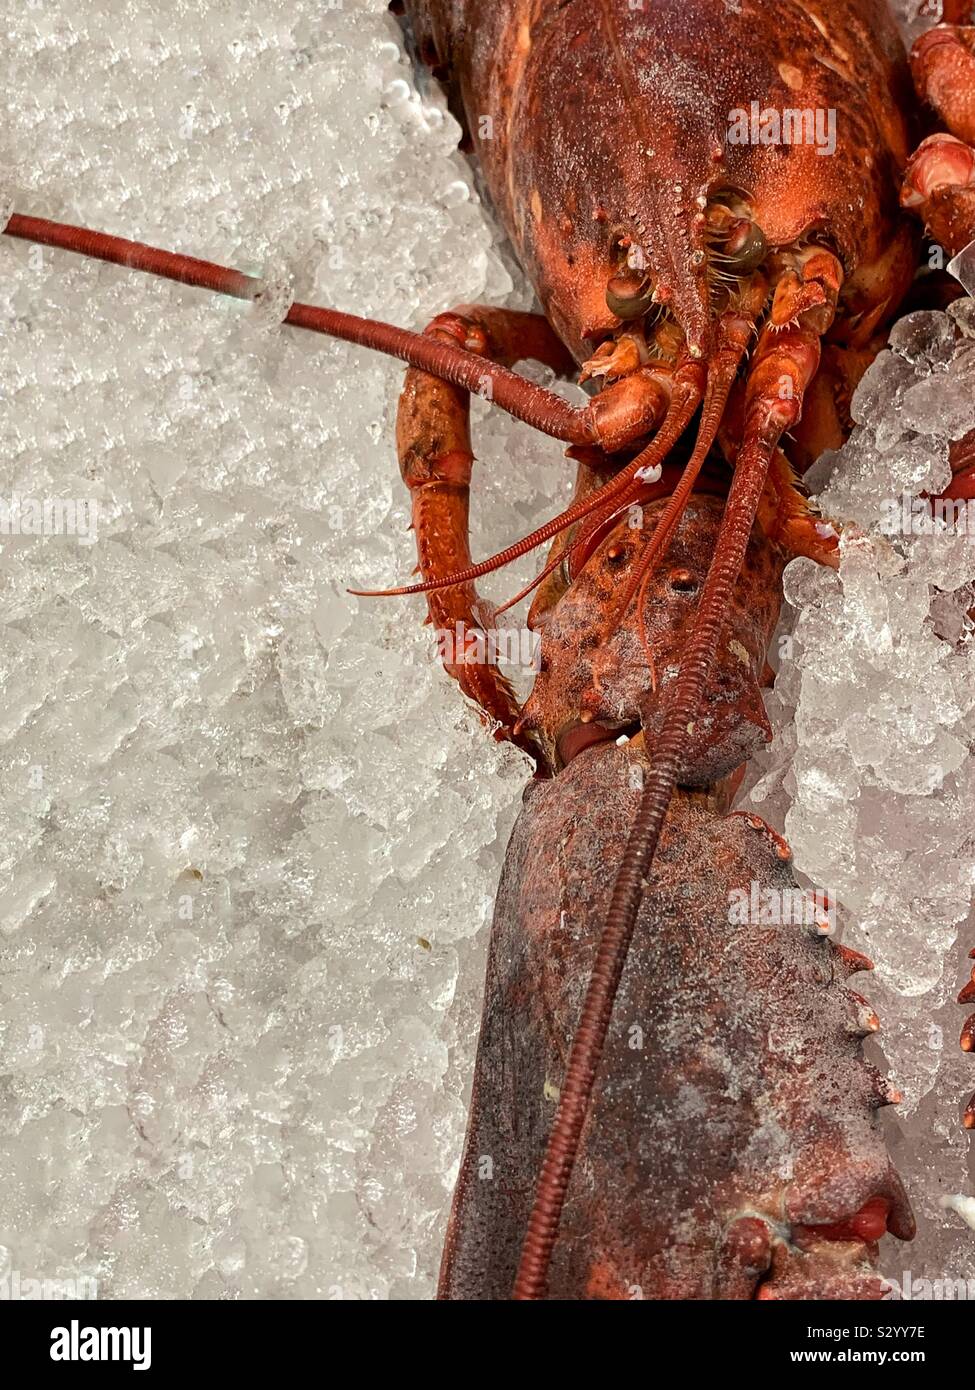 Fresh delicious red lobster served on ice Stock Photo